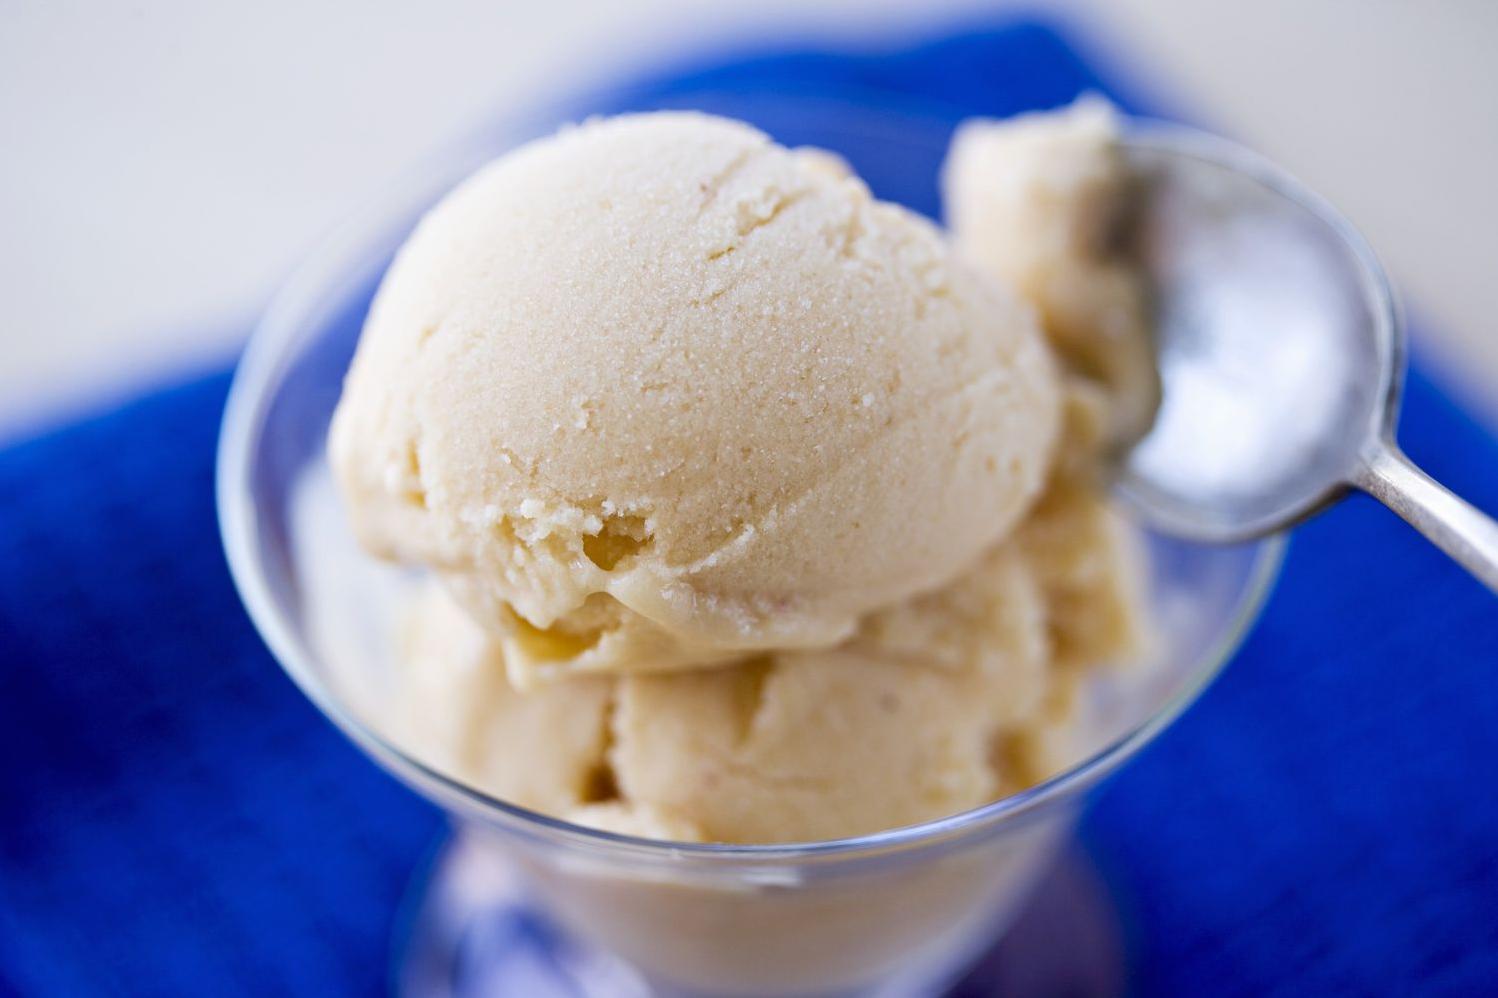  Can't decide between coffee and ice cream? Try them both in one delicious scoop!